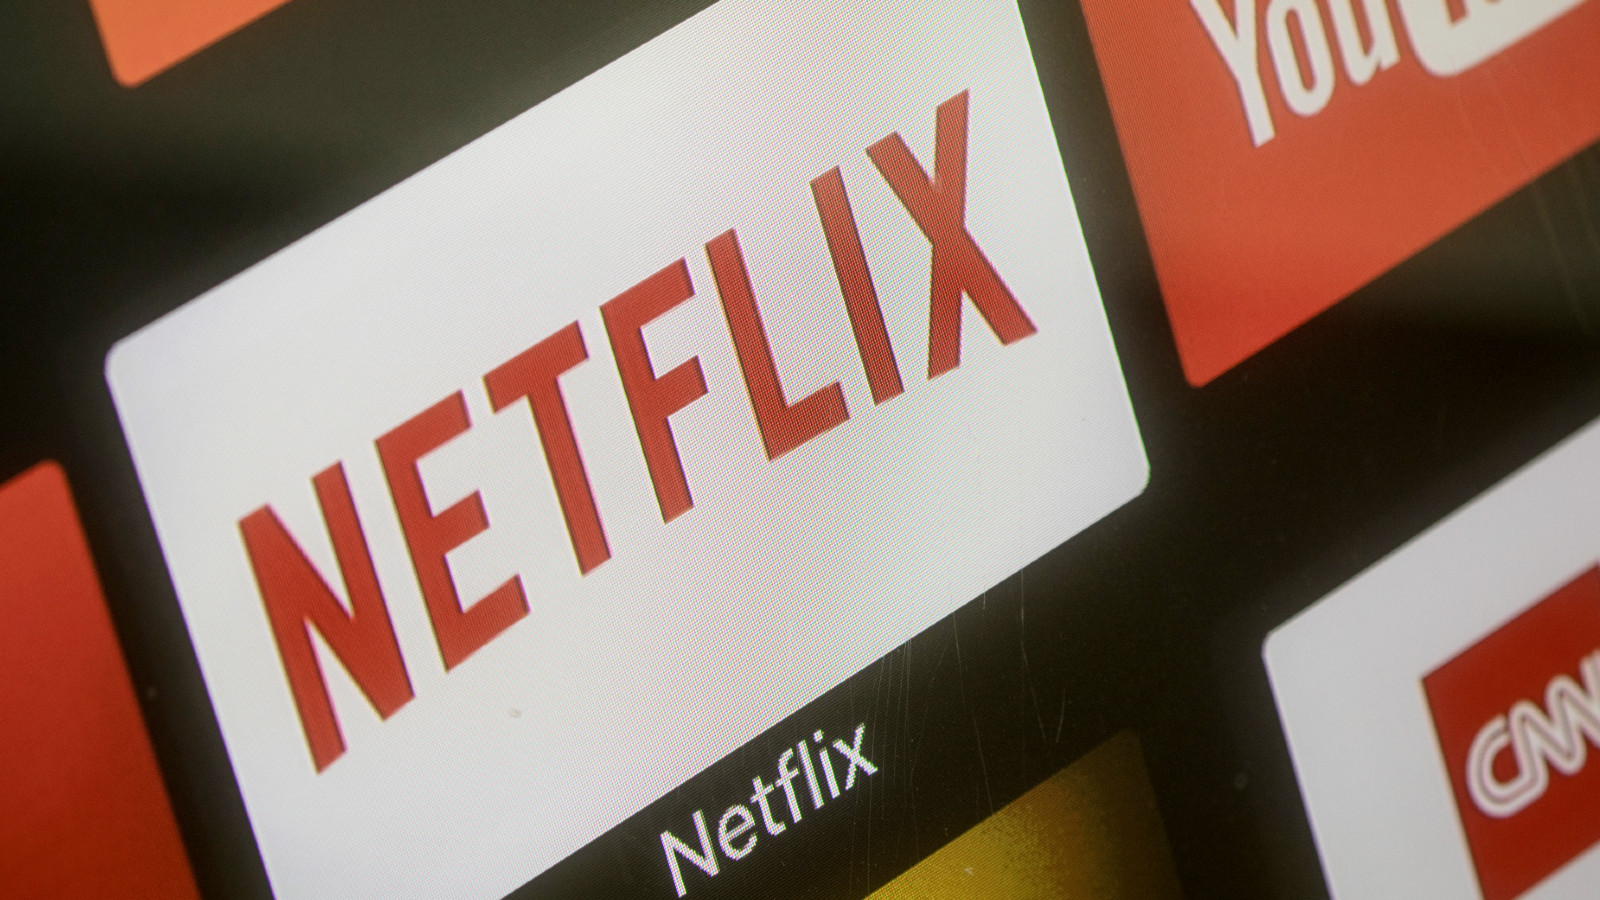 Netflix subscribers are about to start a mass exodus, according to a new poll